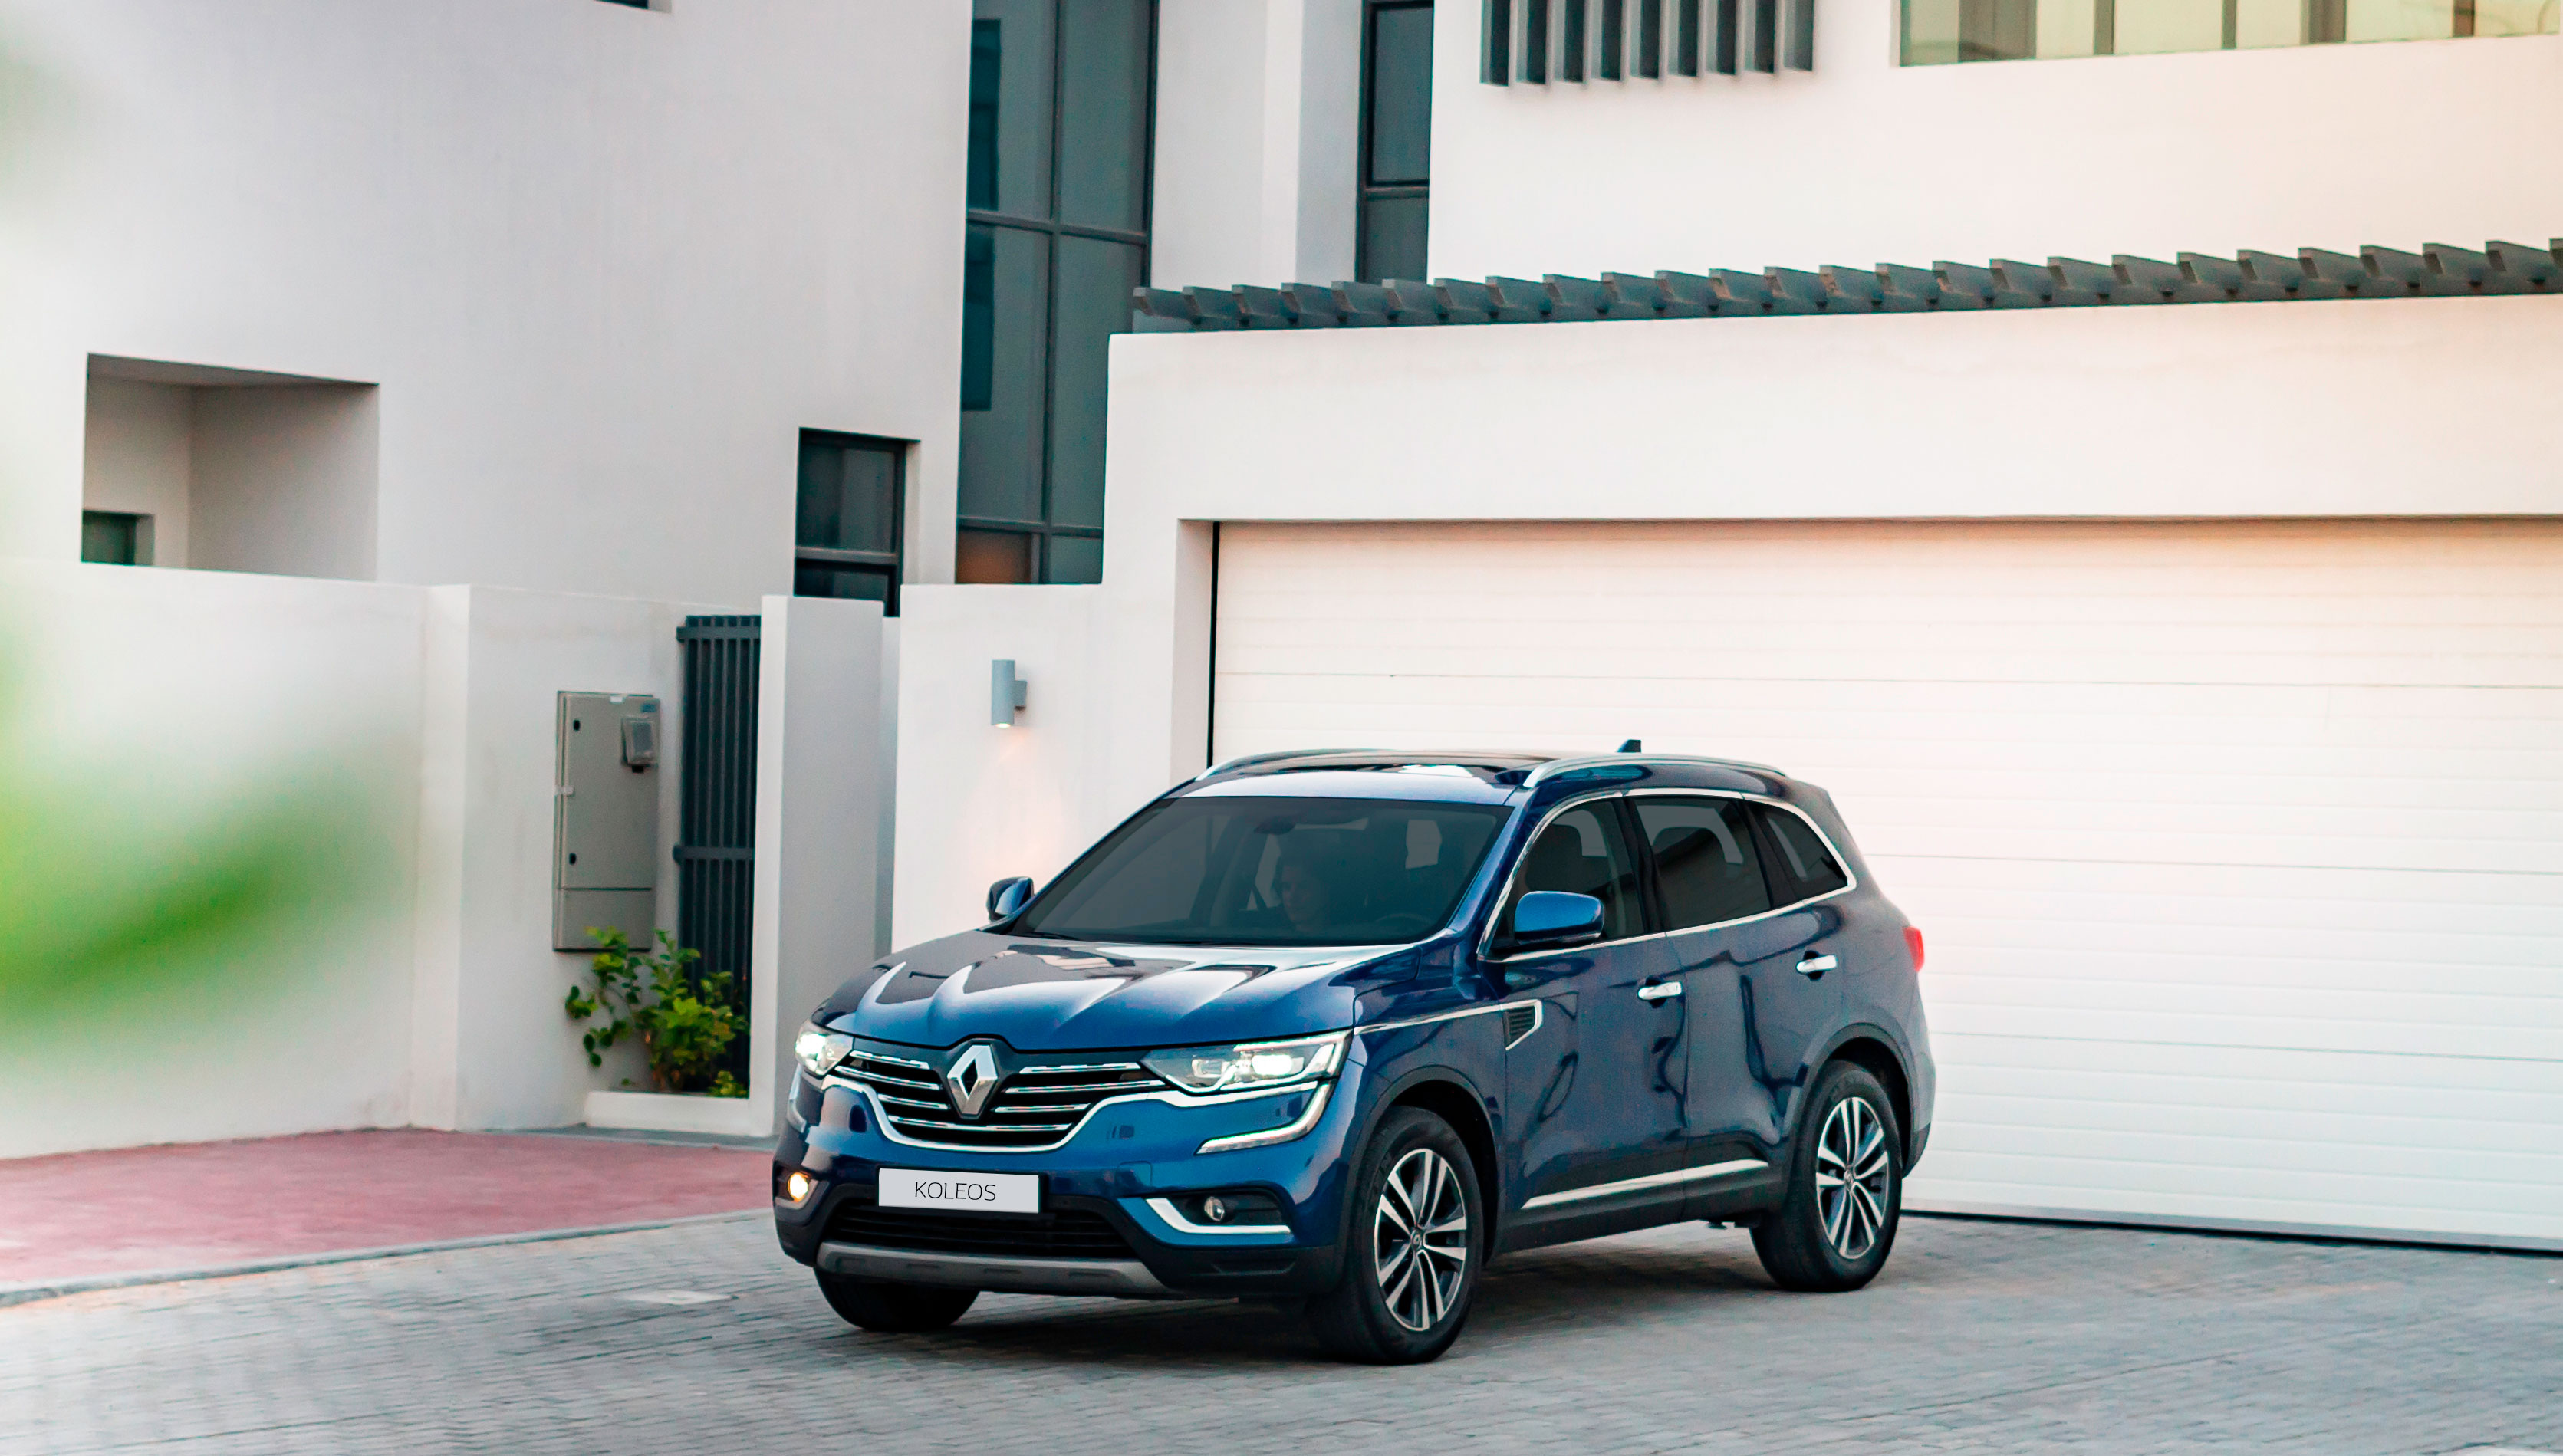 Start a New Adventure Every Day with the Koleos From RENAULT of Arabian Automobiles